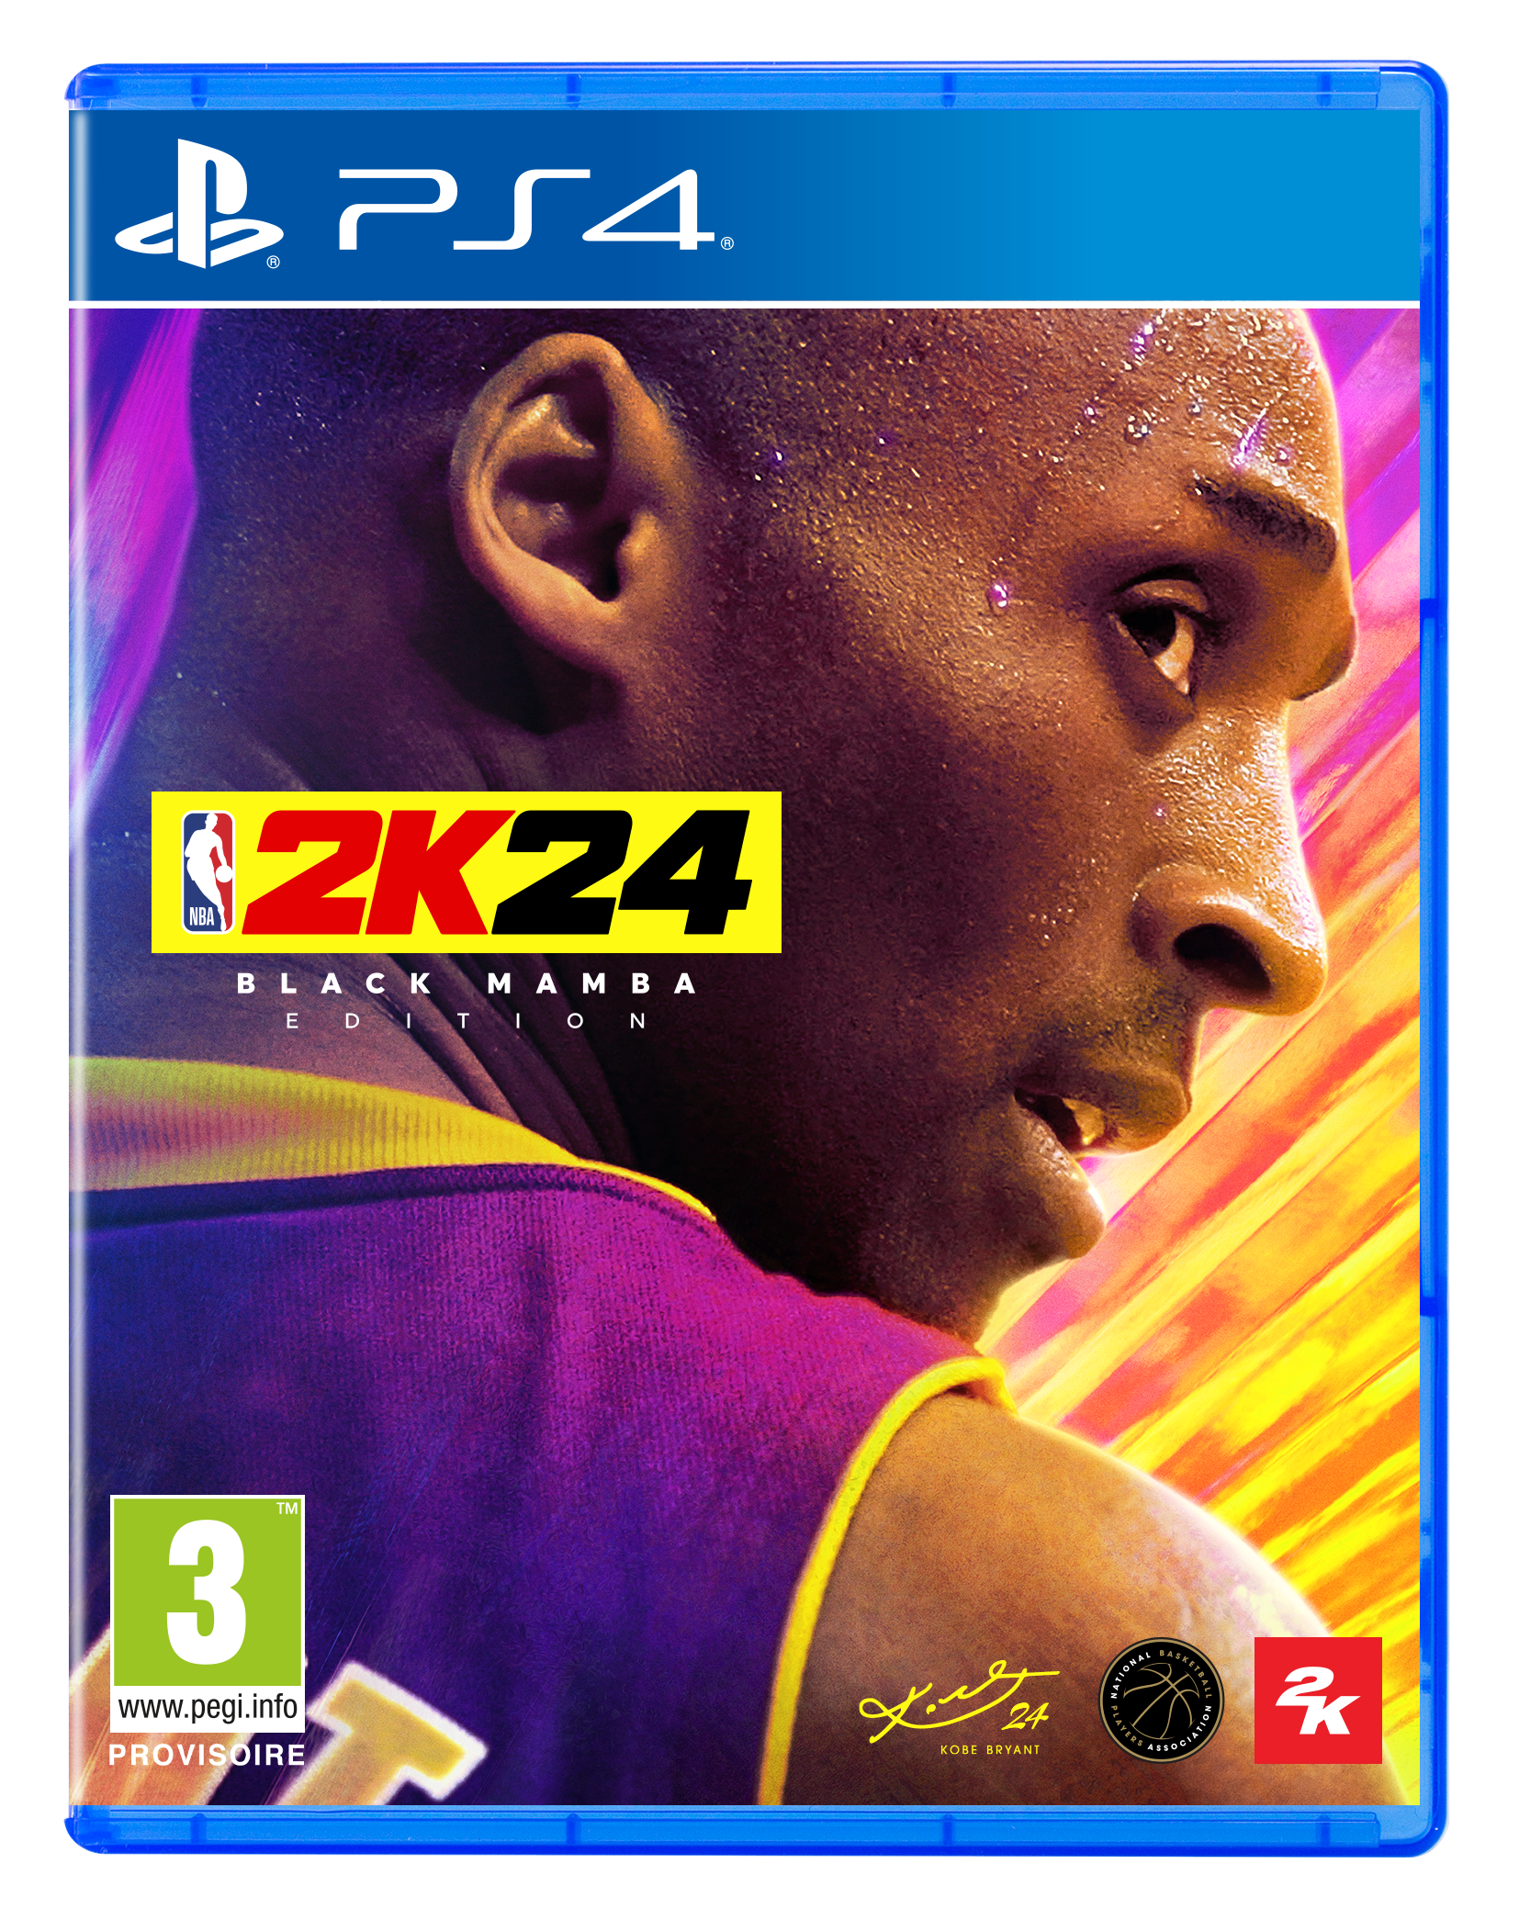 NBA 2K24 - Black Mamba Edition - Not to be sold in Belgium